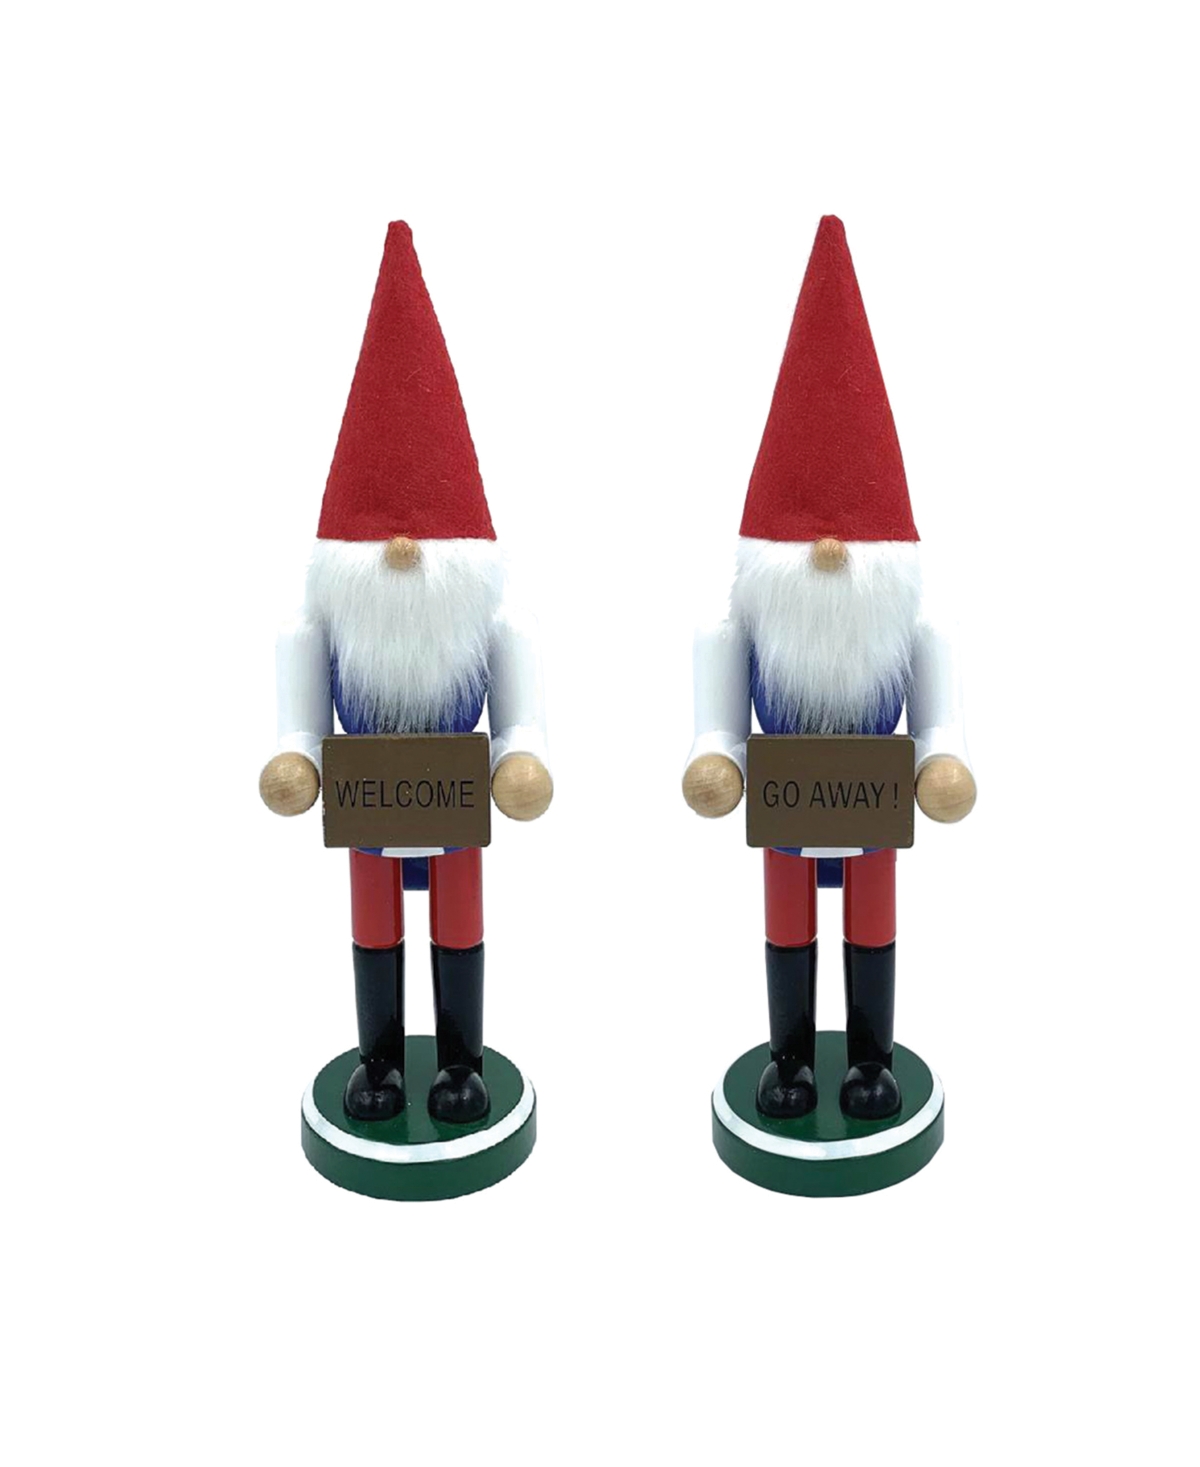 12" Welcome and Go Away Gnome Nutcracker, Set of 2 - Multi